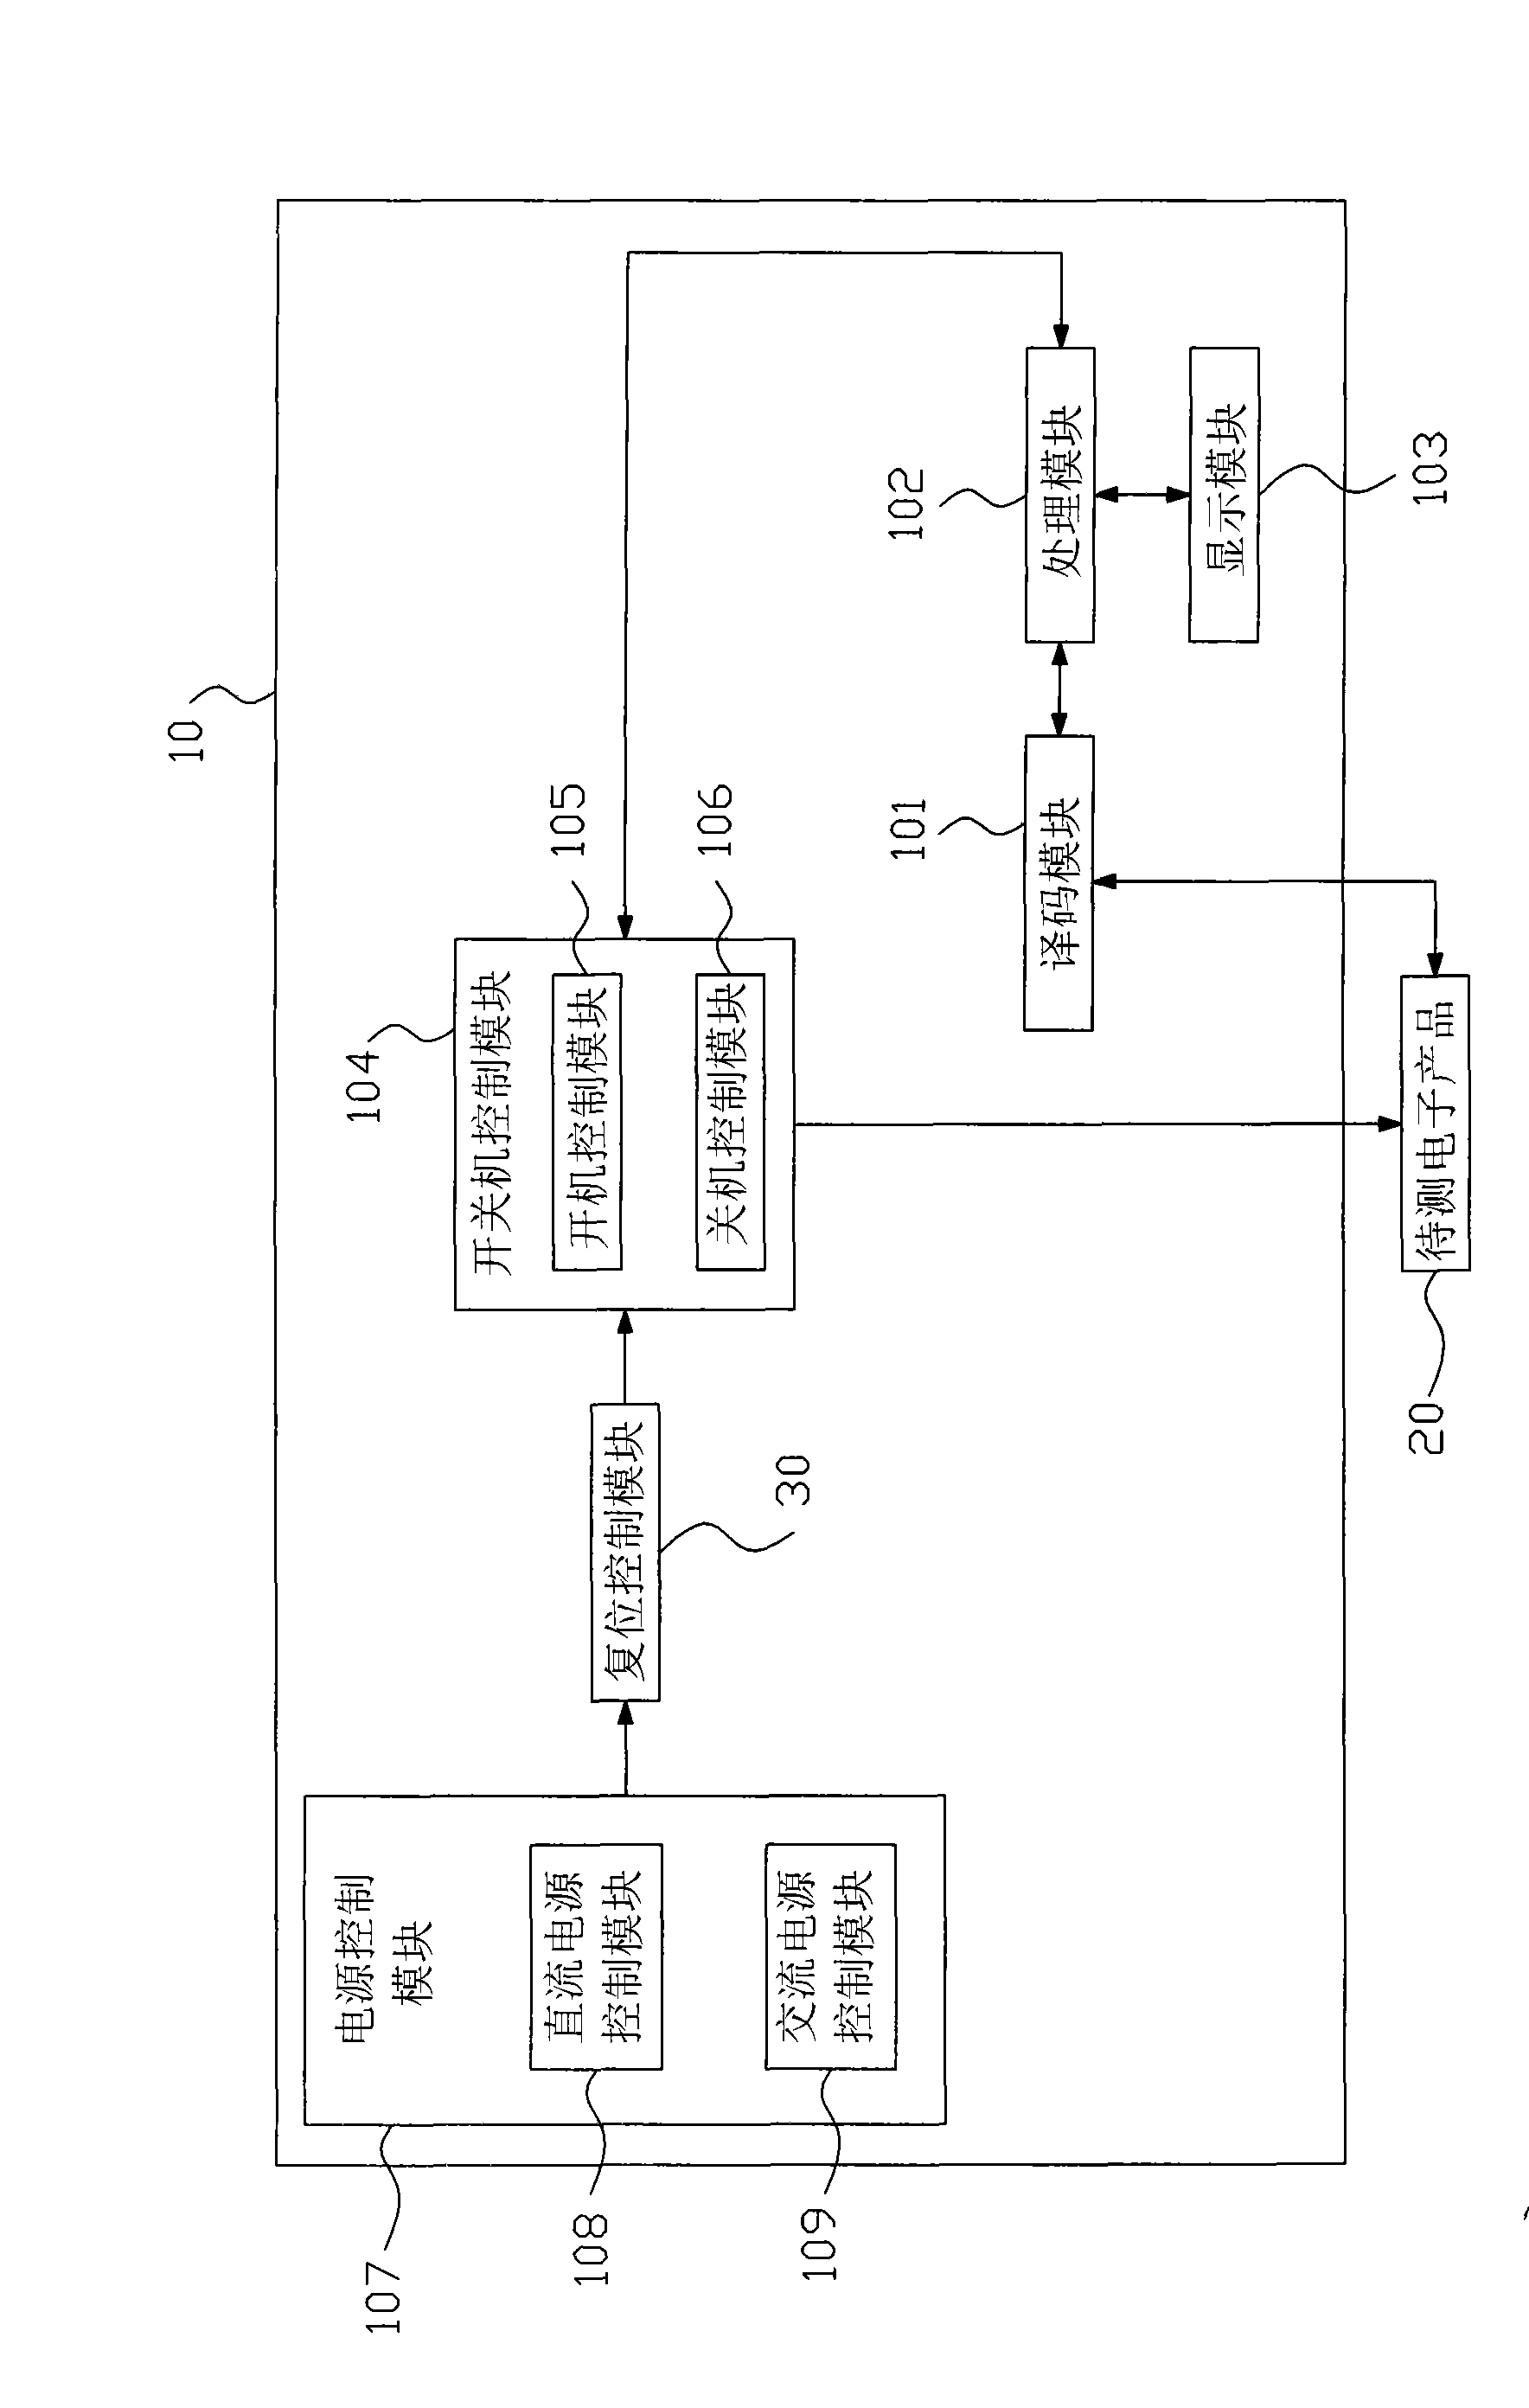 Automatic switching test system and method